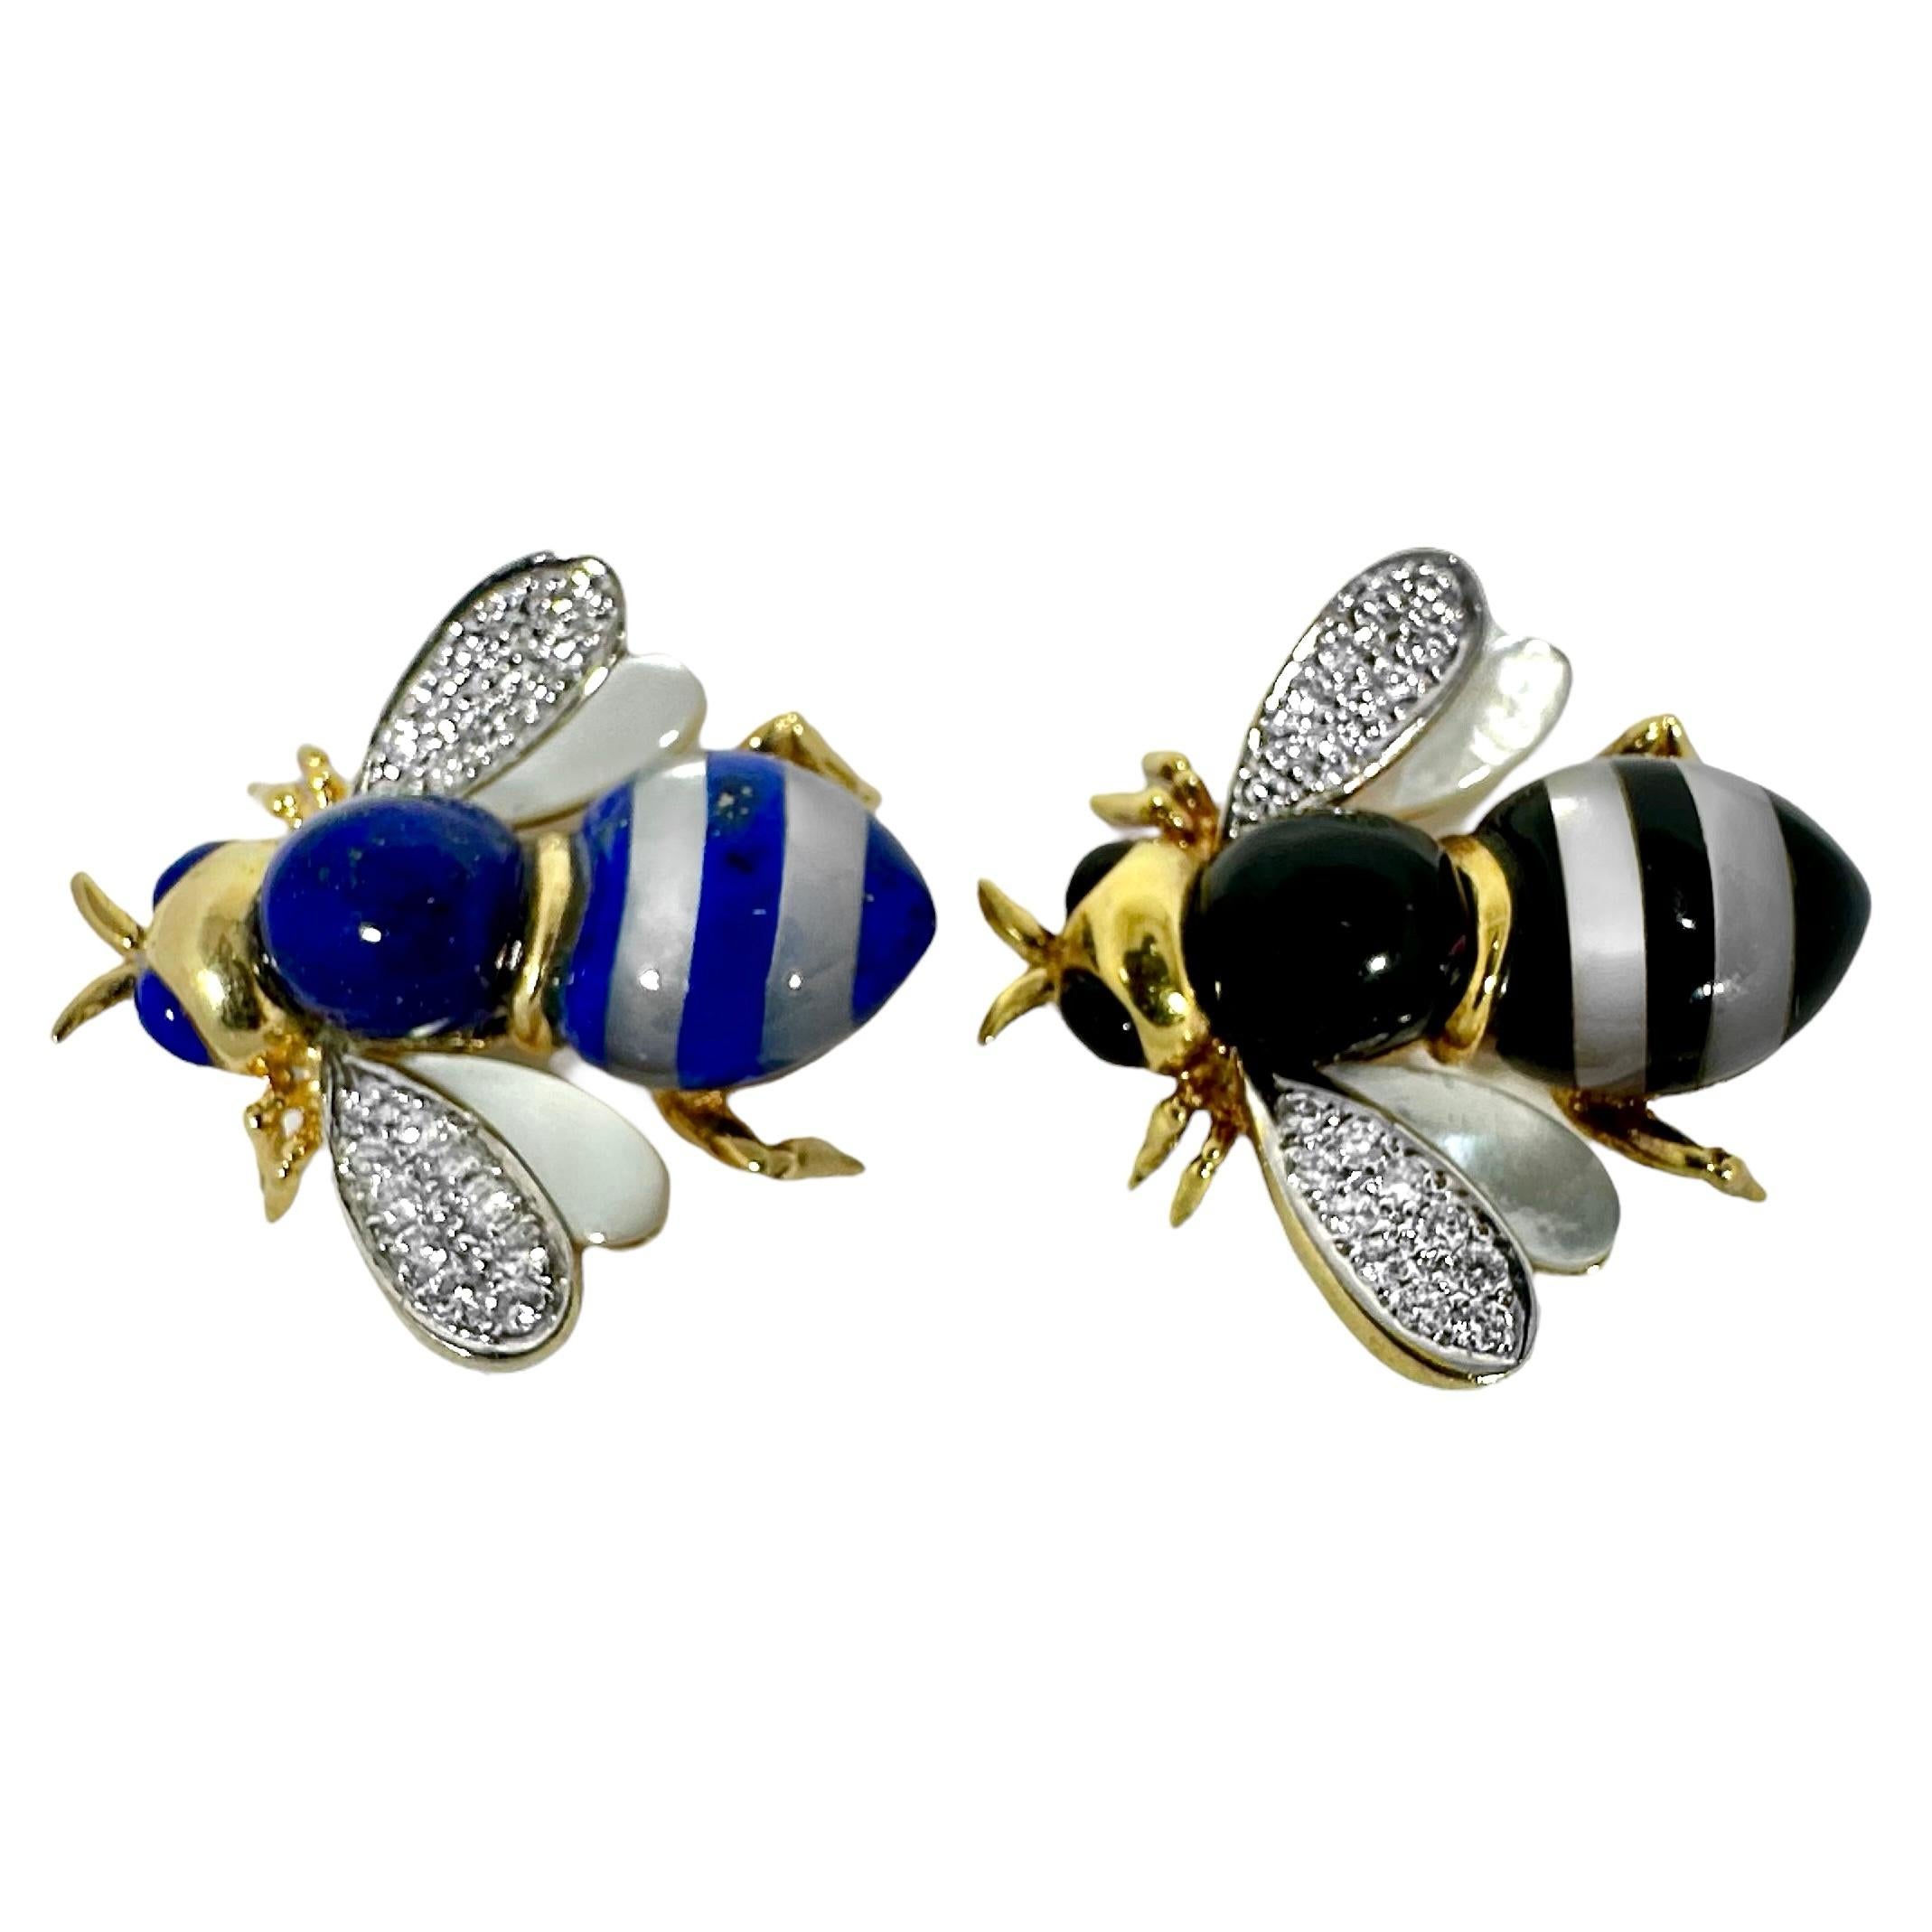 Pair of Stone Inlay Bumble Bee Pins in Gold w/ Diamond Wings by Asch Grossbardt In Good Condition For Sale In Palm Beach, FL